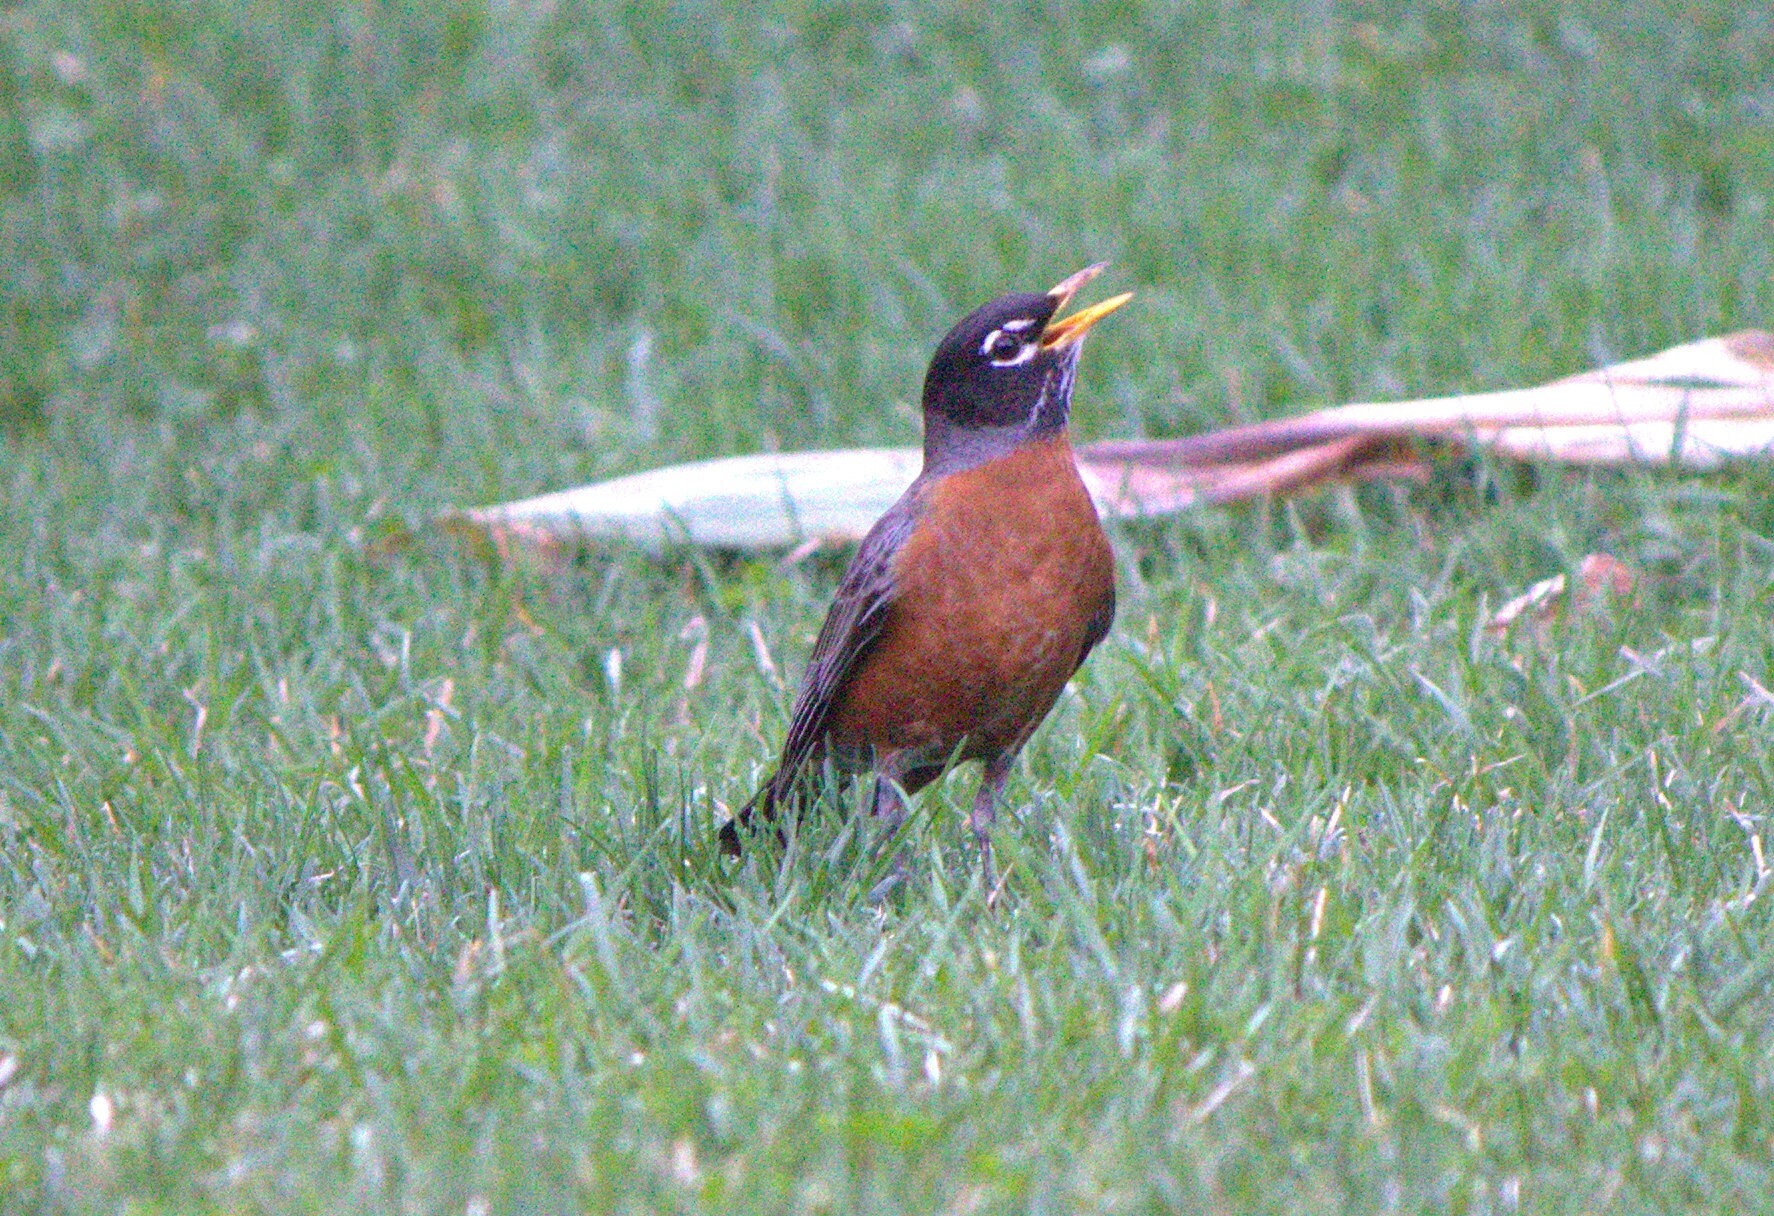 The American Robin produces a high-pitched call that alerts other birds to the presence of a bird of prey. <a href="https://www.flickr.com/photos/beaumontpete/7012088291/" target="_blank">Photo</a>: Beaumontpete/<a href="https://creativecommons.org/licenses/by-nc-nd/2.0/" target="_blank" >CC BY-NC-ND 2.0</a>